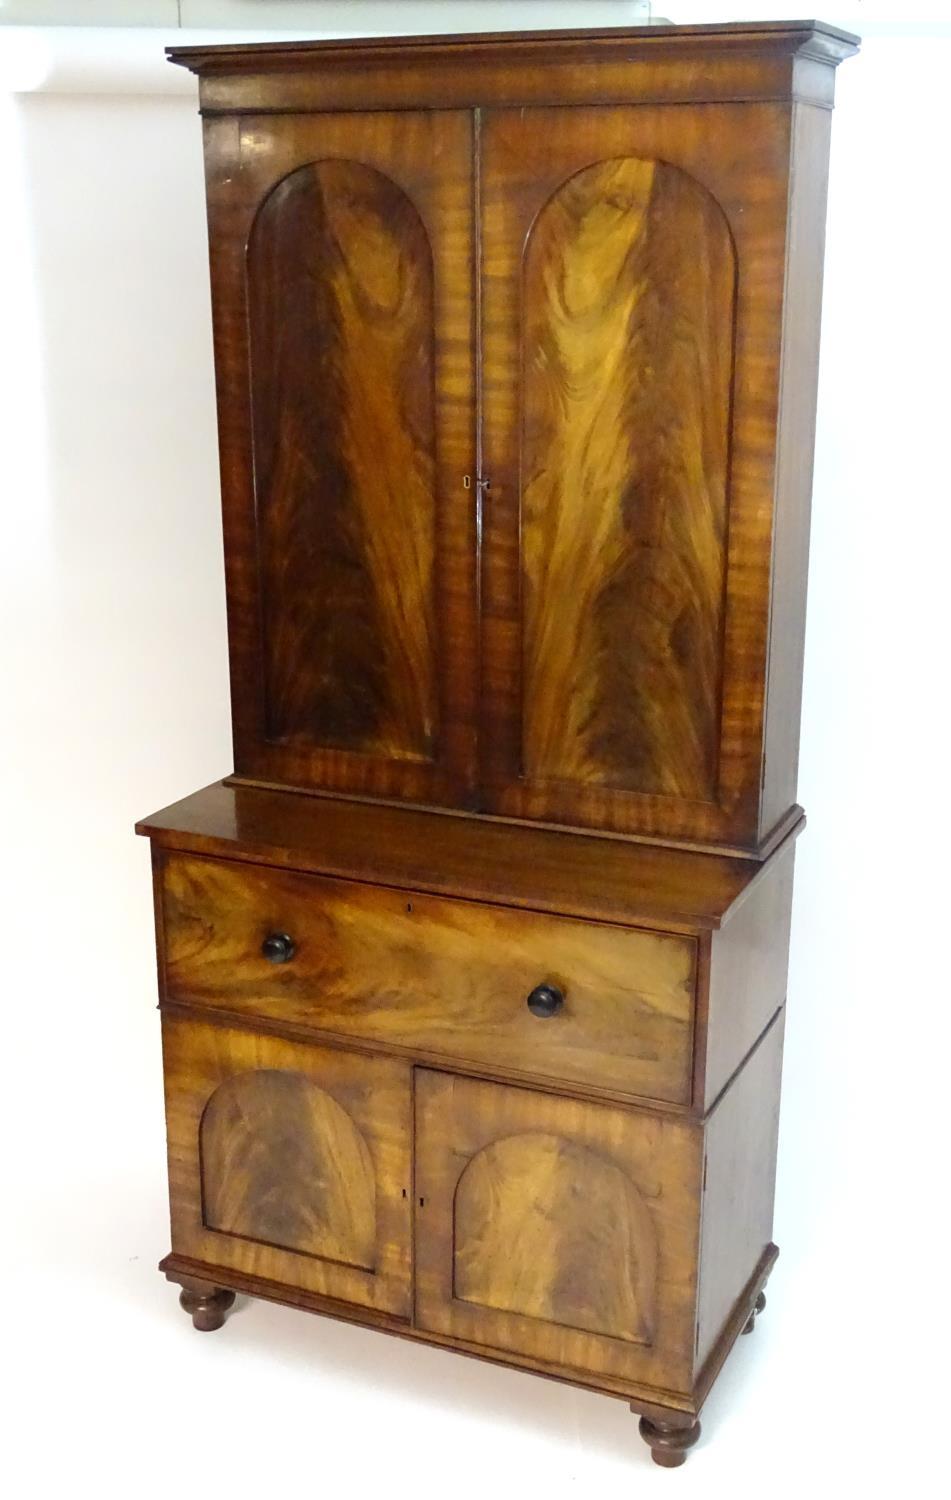 A mid 19thC mahogany secretaire bookcase, having a moulded cornice above two flame mahogany panelled